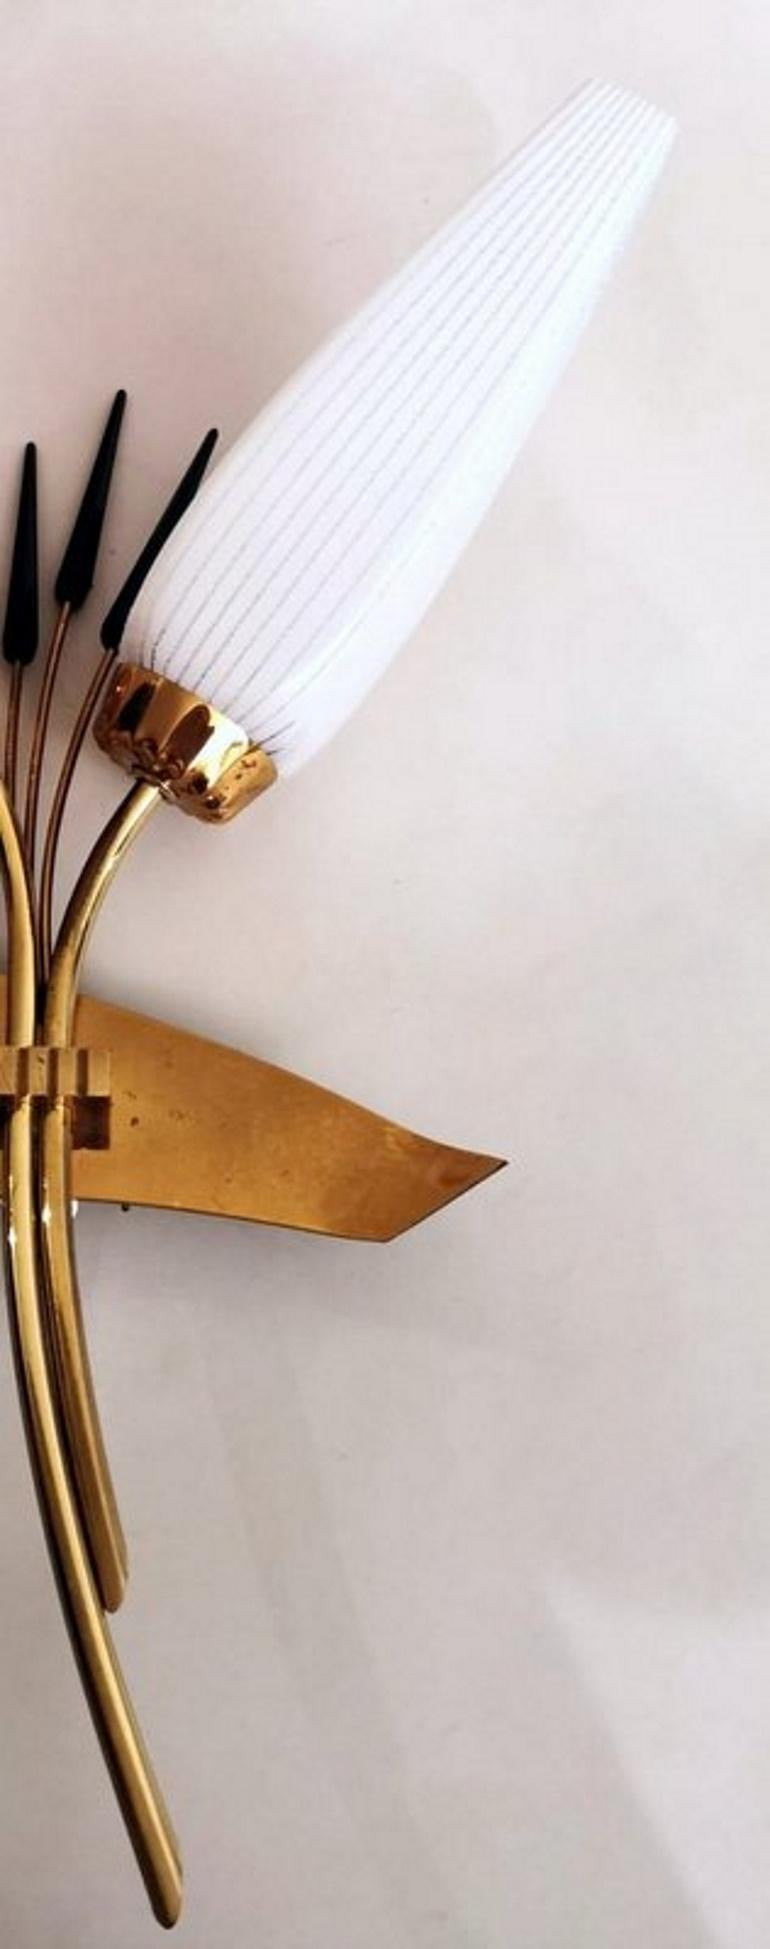 Blackened Vintage French Wall Sconce in Polished Brass with Black and White Glass